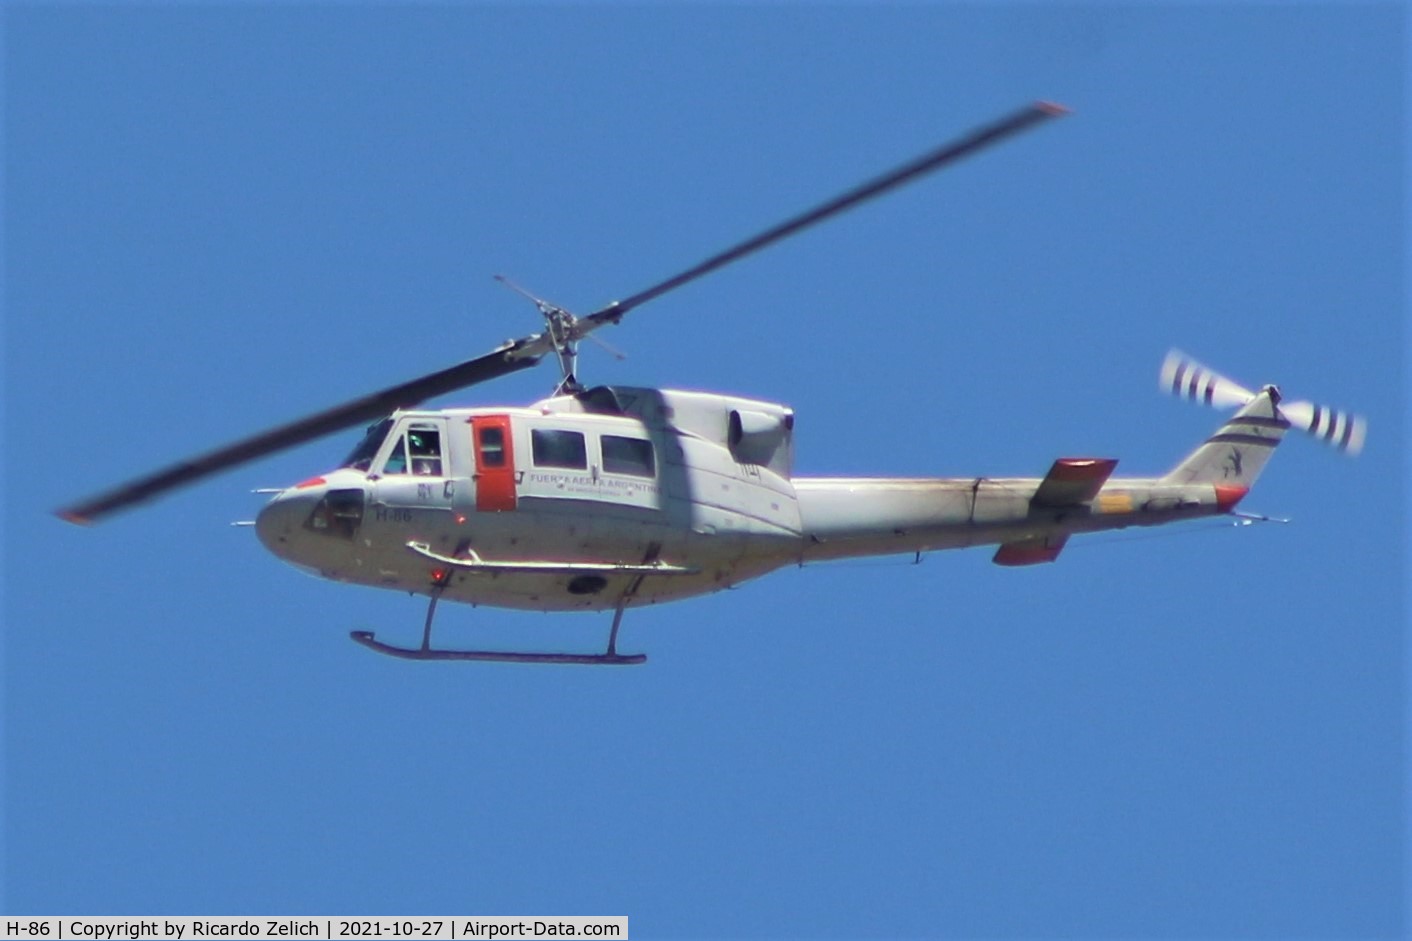 H-86, Bell 212 C/N 30838, Flying over Campana city, Buenos Aires province, Argentina.